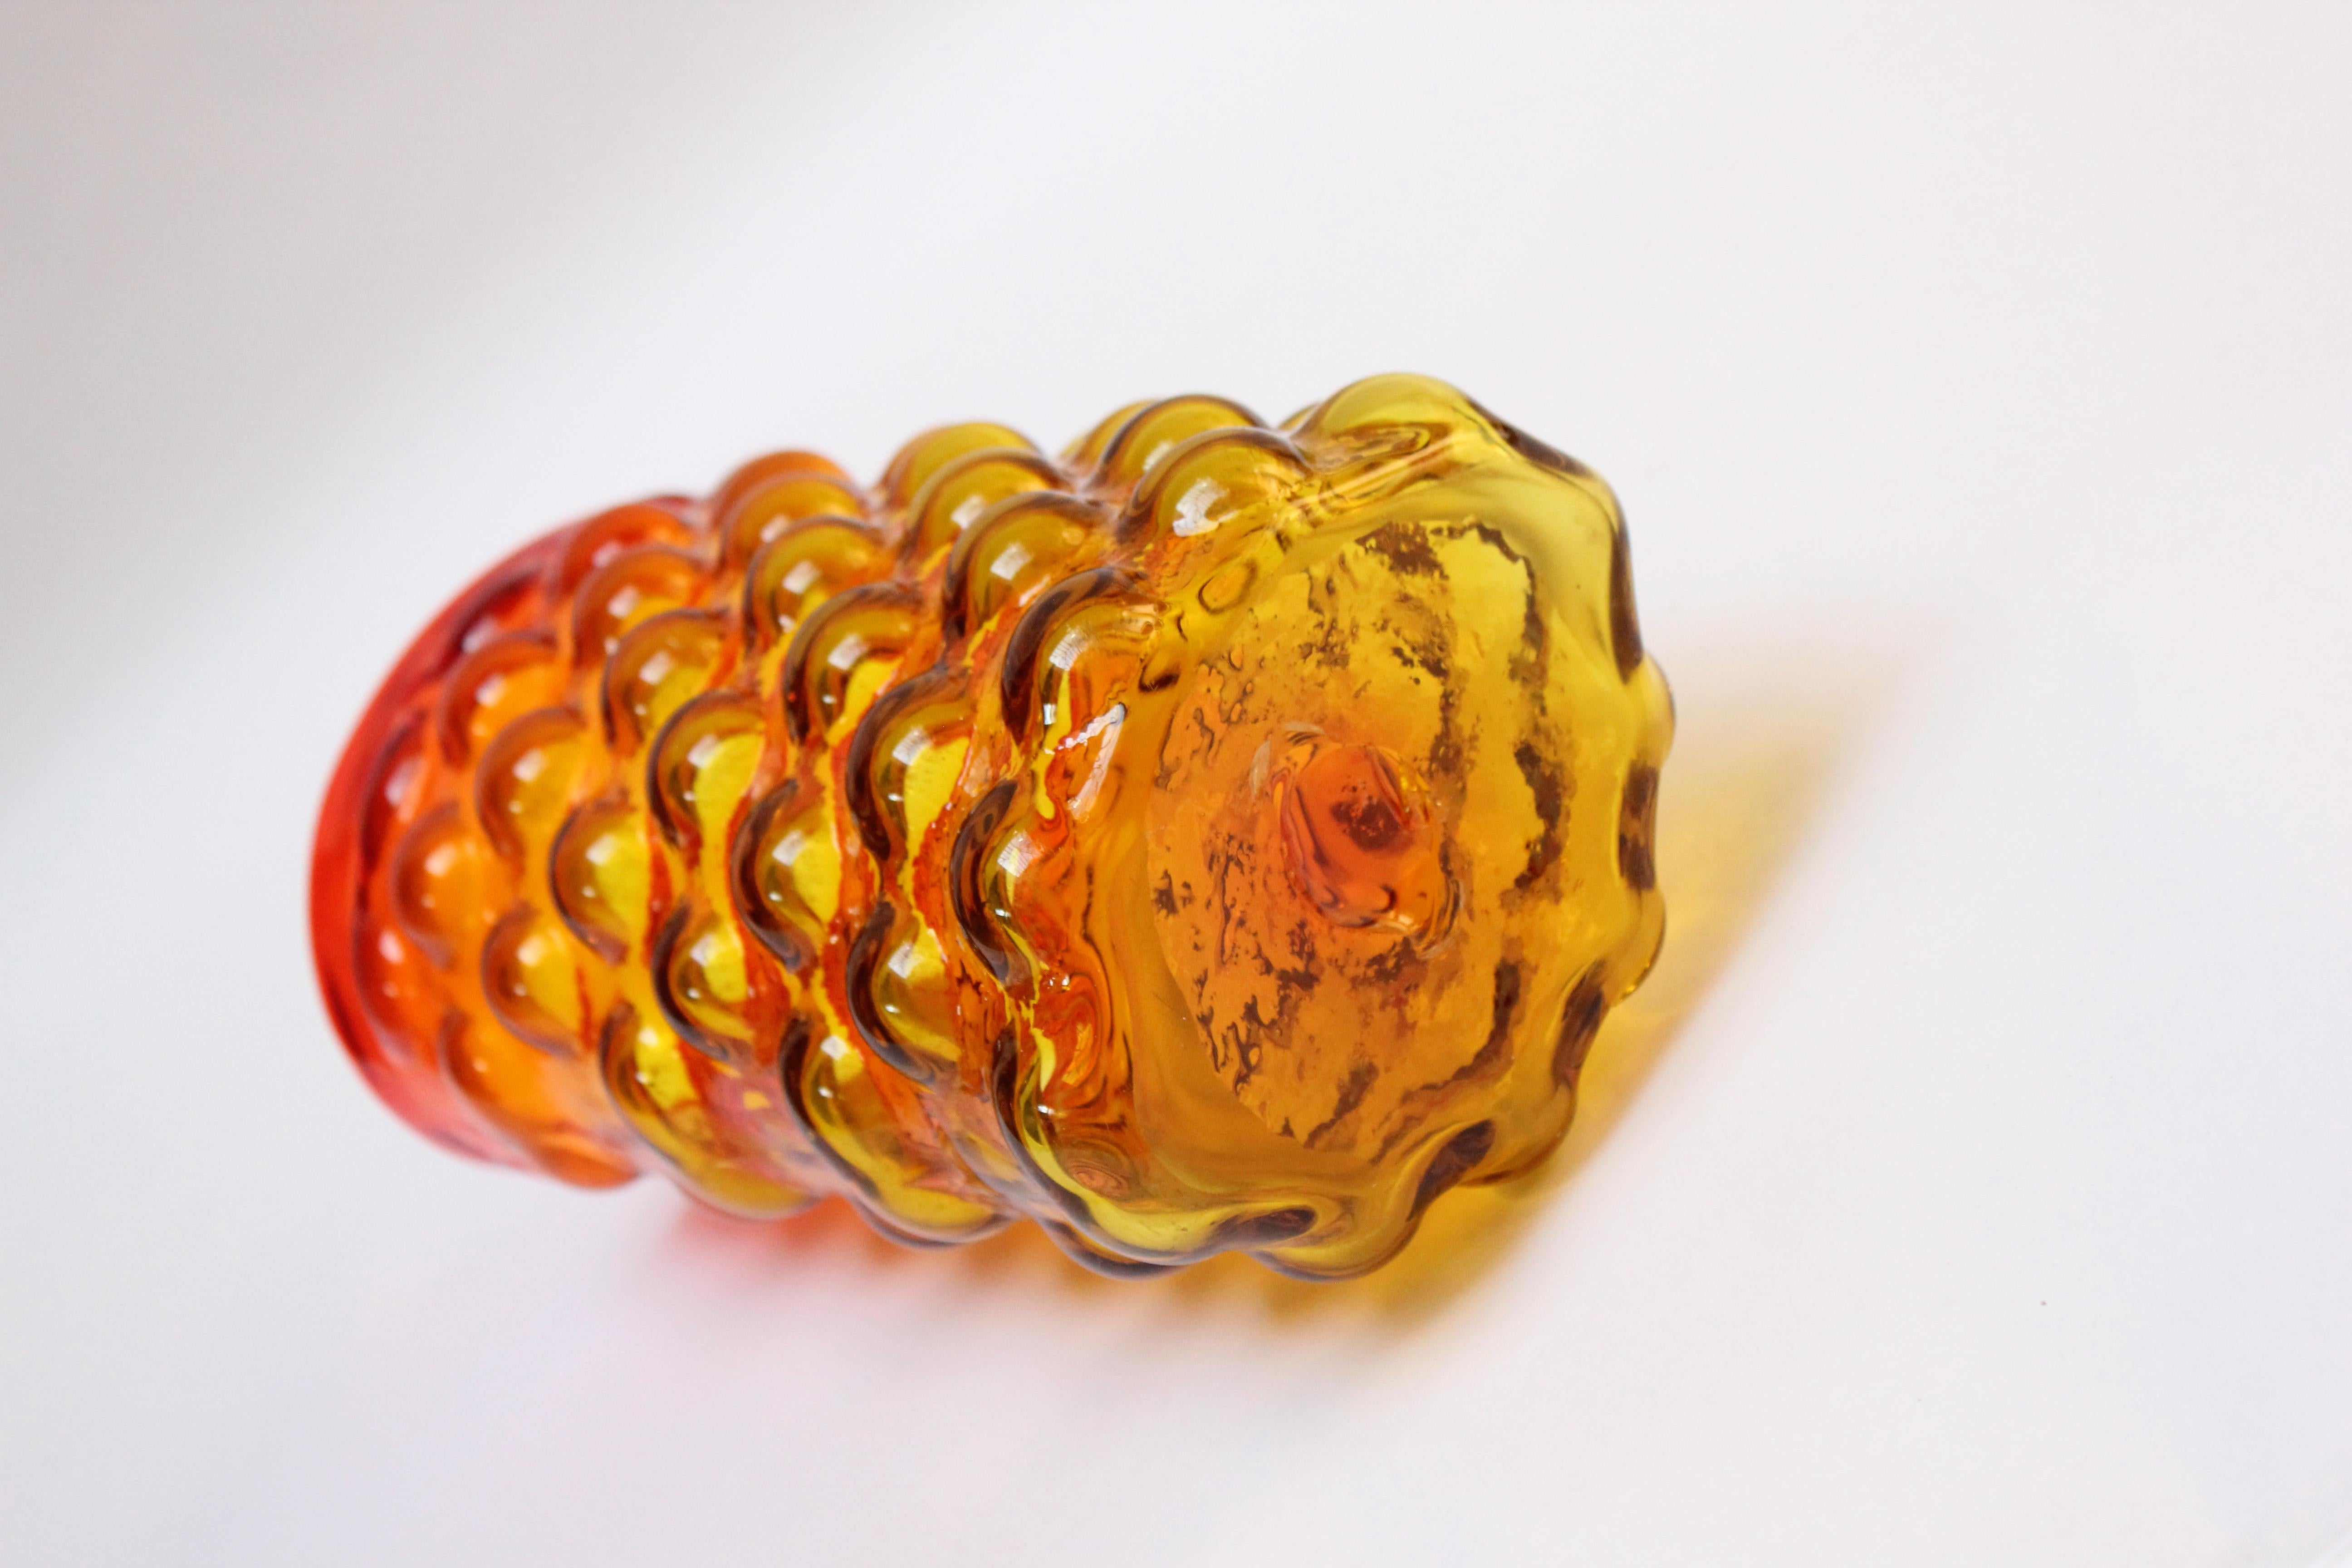 Blown glass vase designed in 1961 by Wayne Husted for Blenko (model number 6041). Attractive 'bubble' pattern throughout and brilliant amberina / tangerine palette with red and yellow meeting to produce an orange banding toward the top.
Features